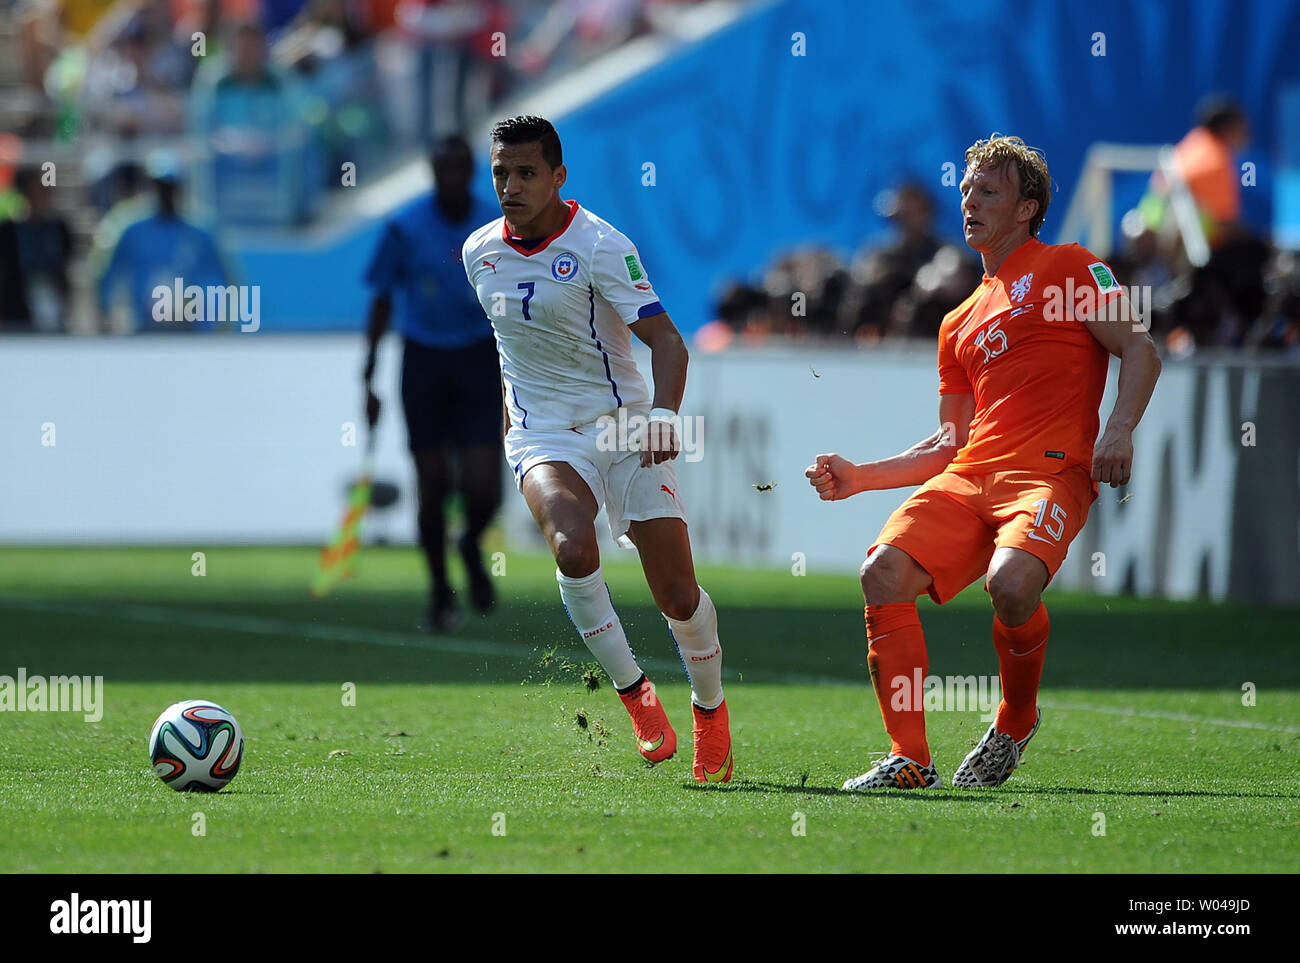 Dirk Kuyt of the Netherlands competes with Alexis Sanchez (L) of Chile during the 2014 FIFA World Cup Group B match at the Arena Corinthians in Sao Paulo, Brazil on June 23, 2014. UPI/Chris Brunskill Stock Photo